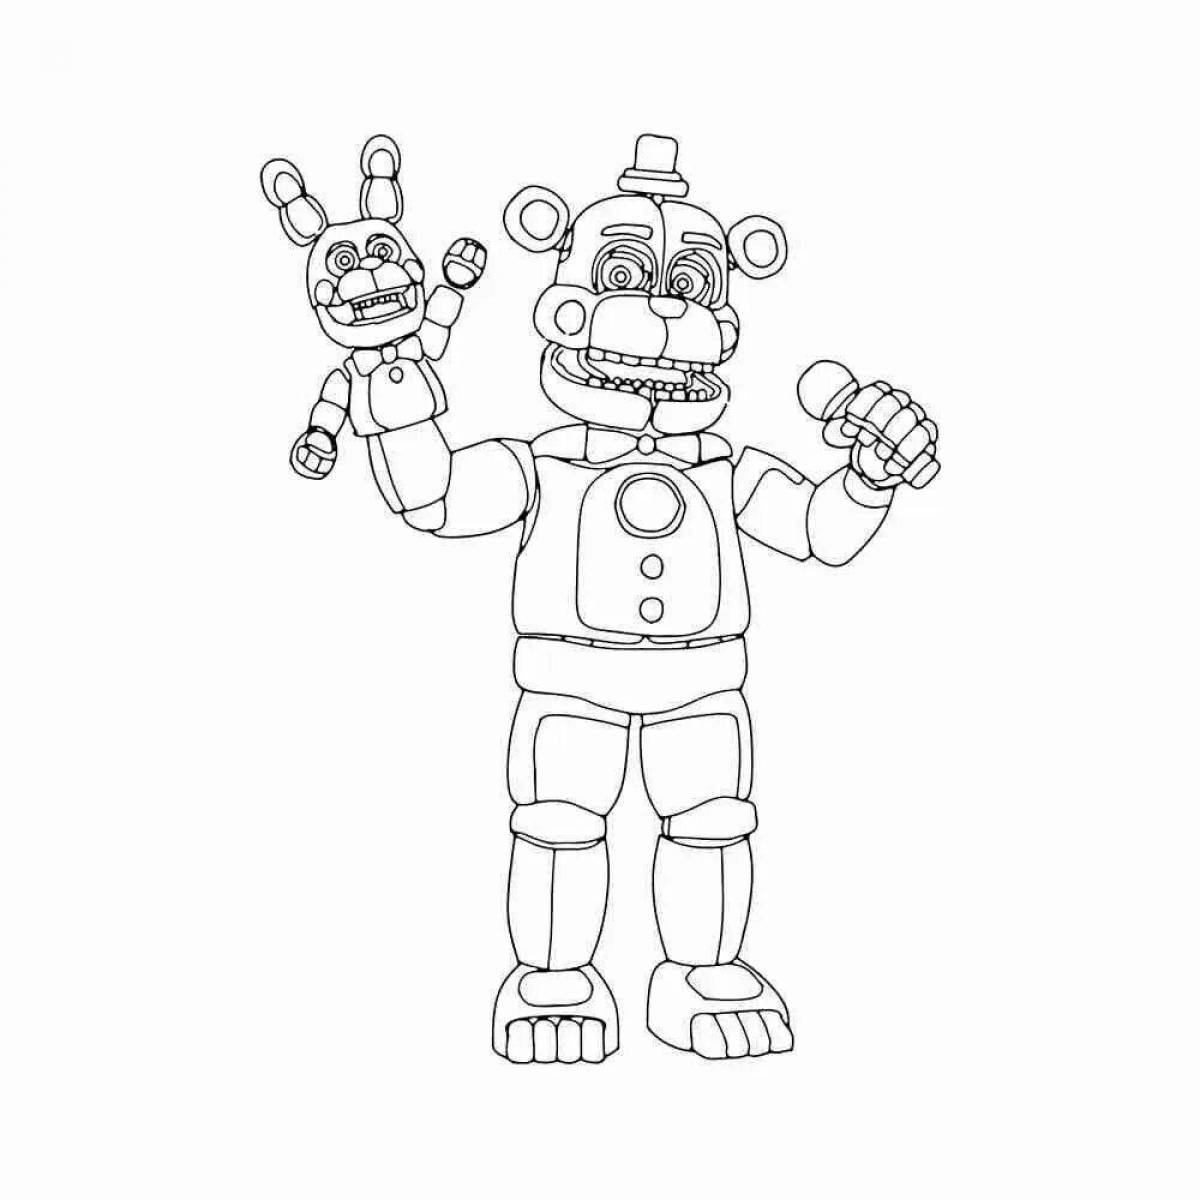 Joyful freddy coloring pages for kids